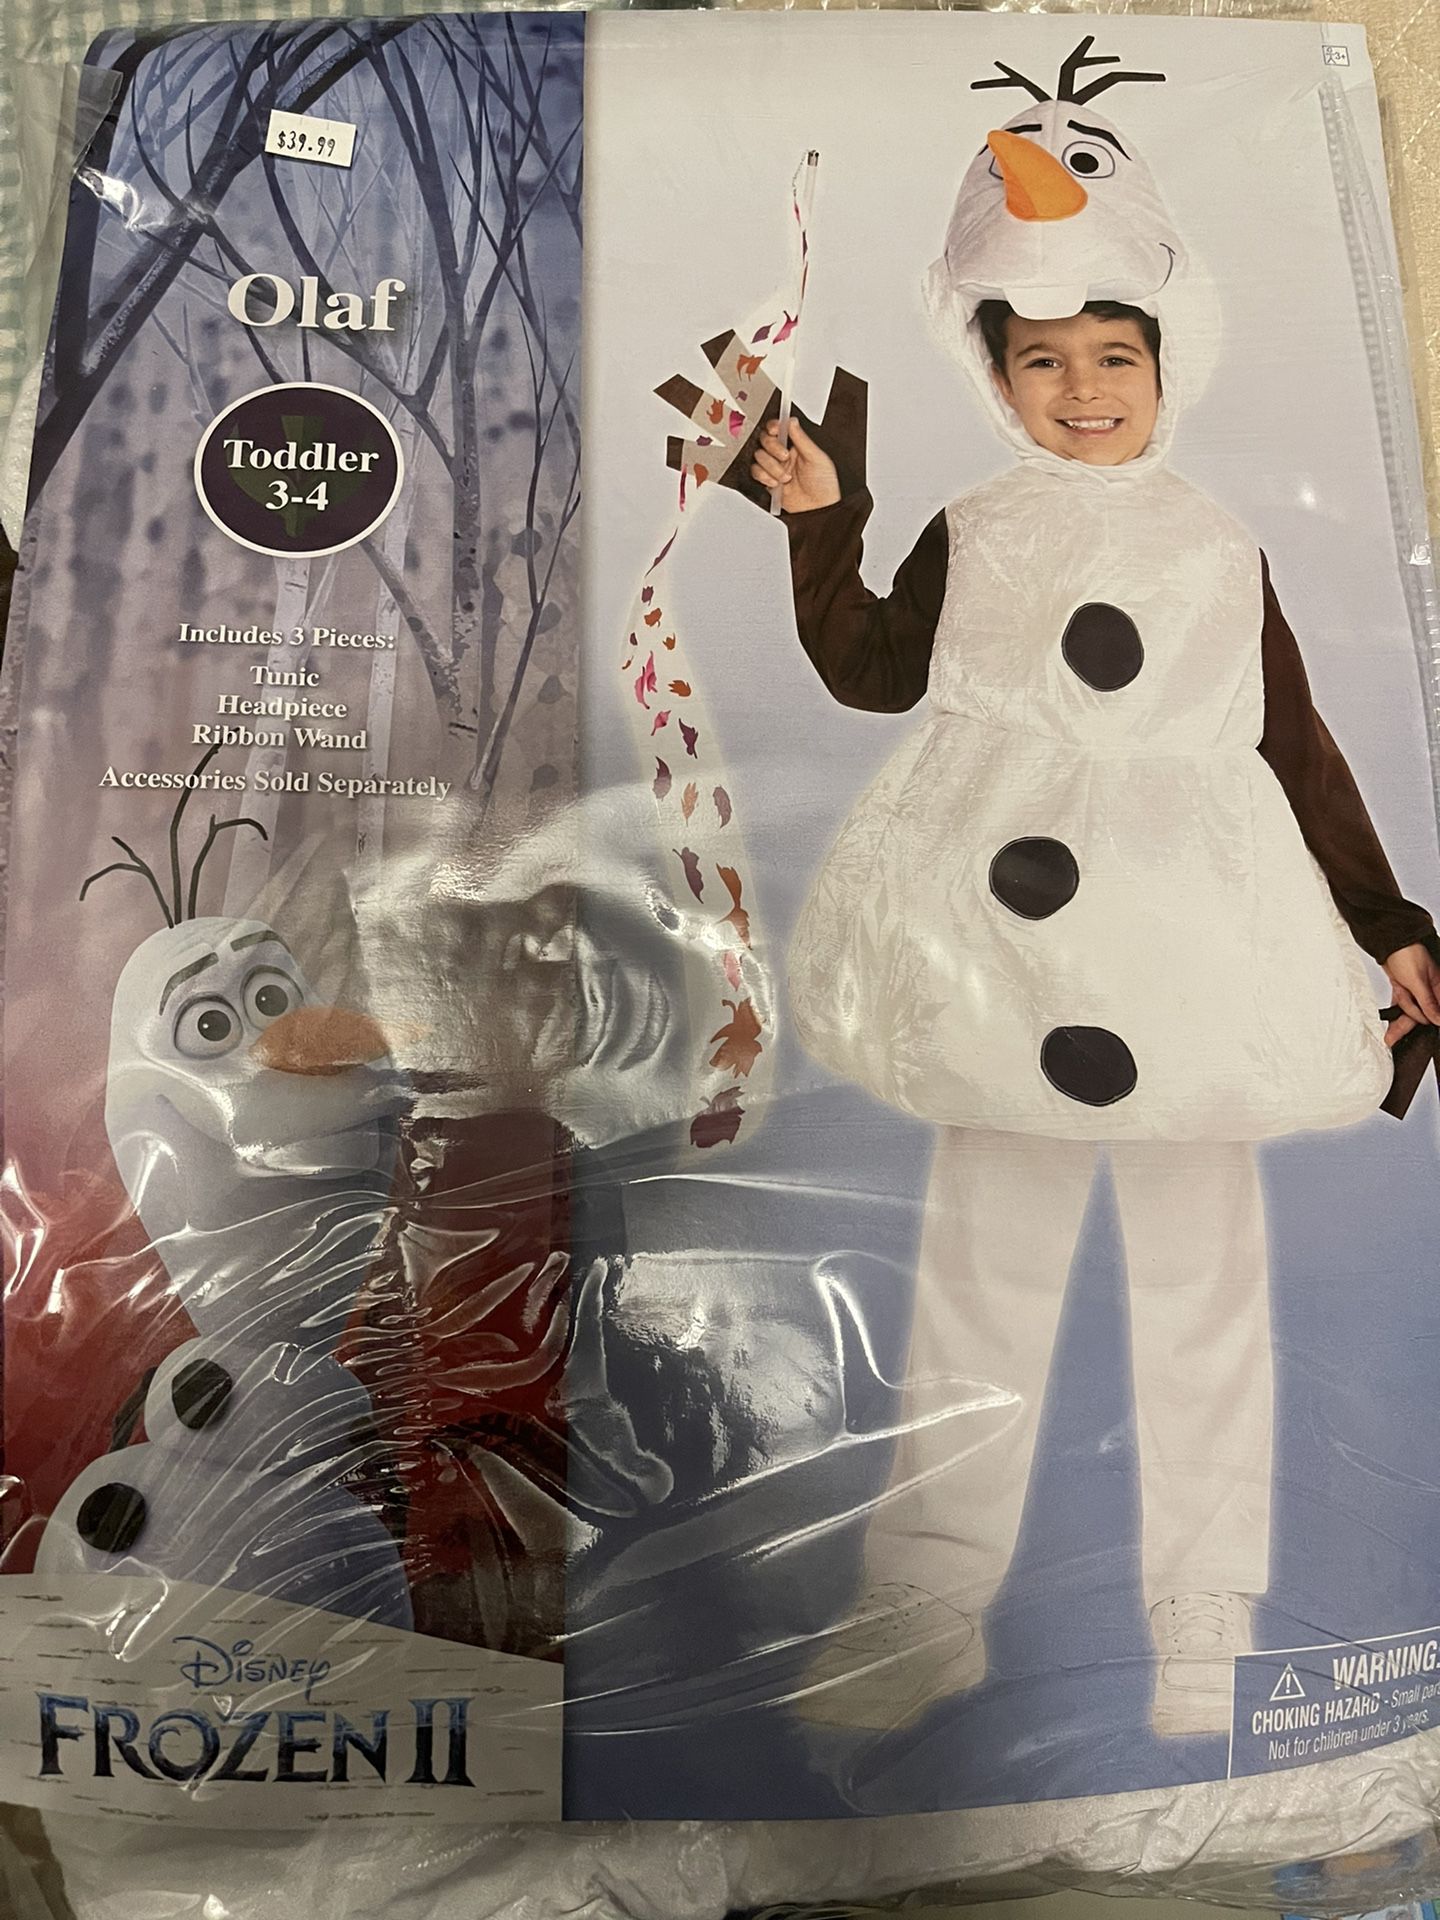 New Olaf In Package Toddler 3-4 